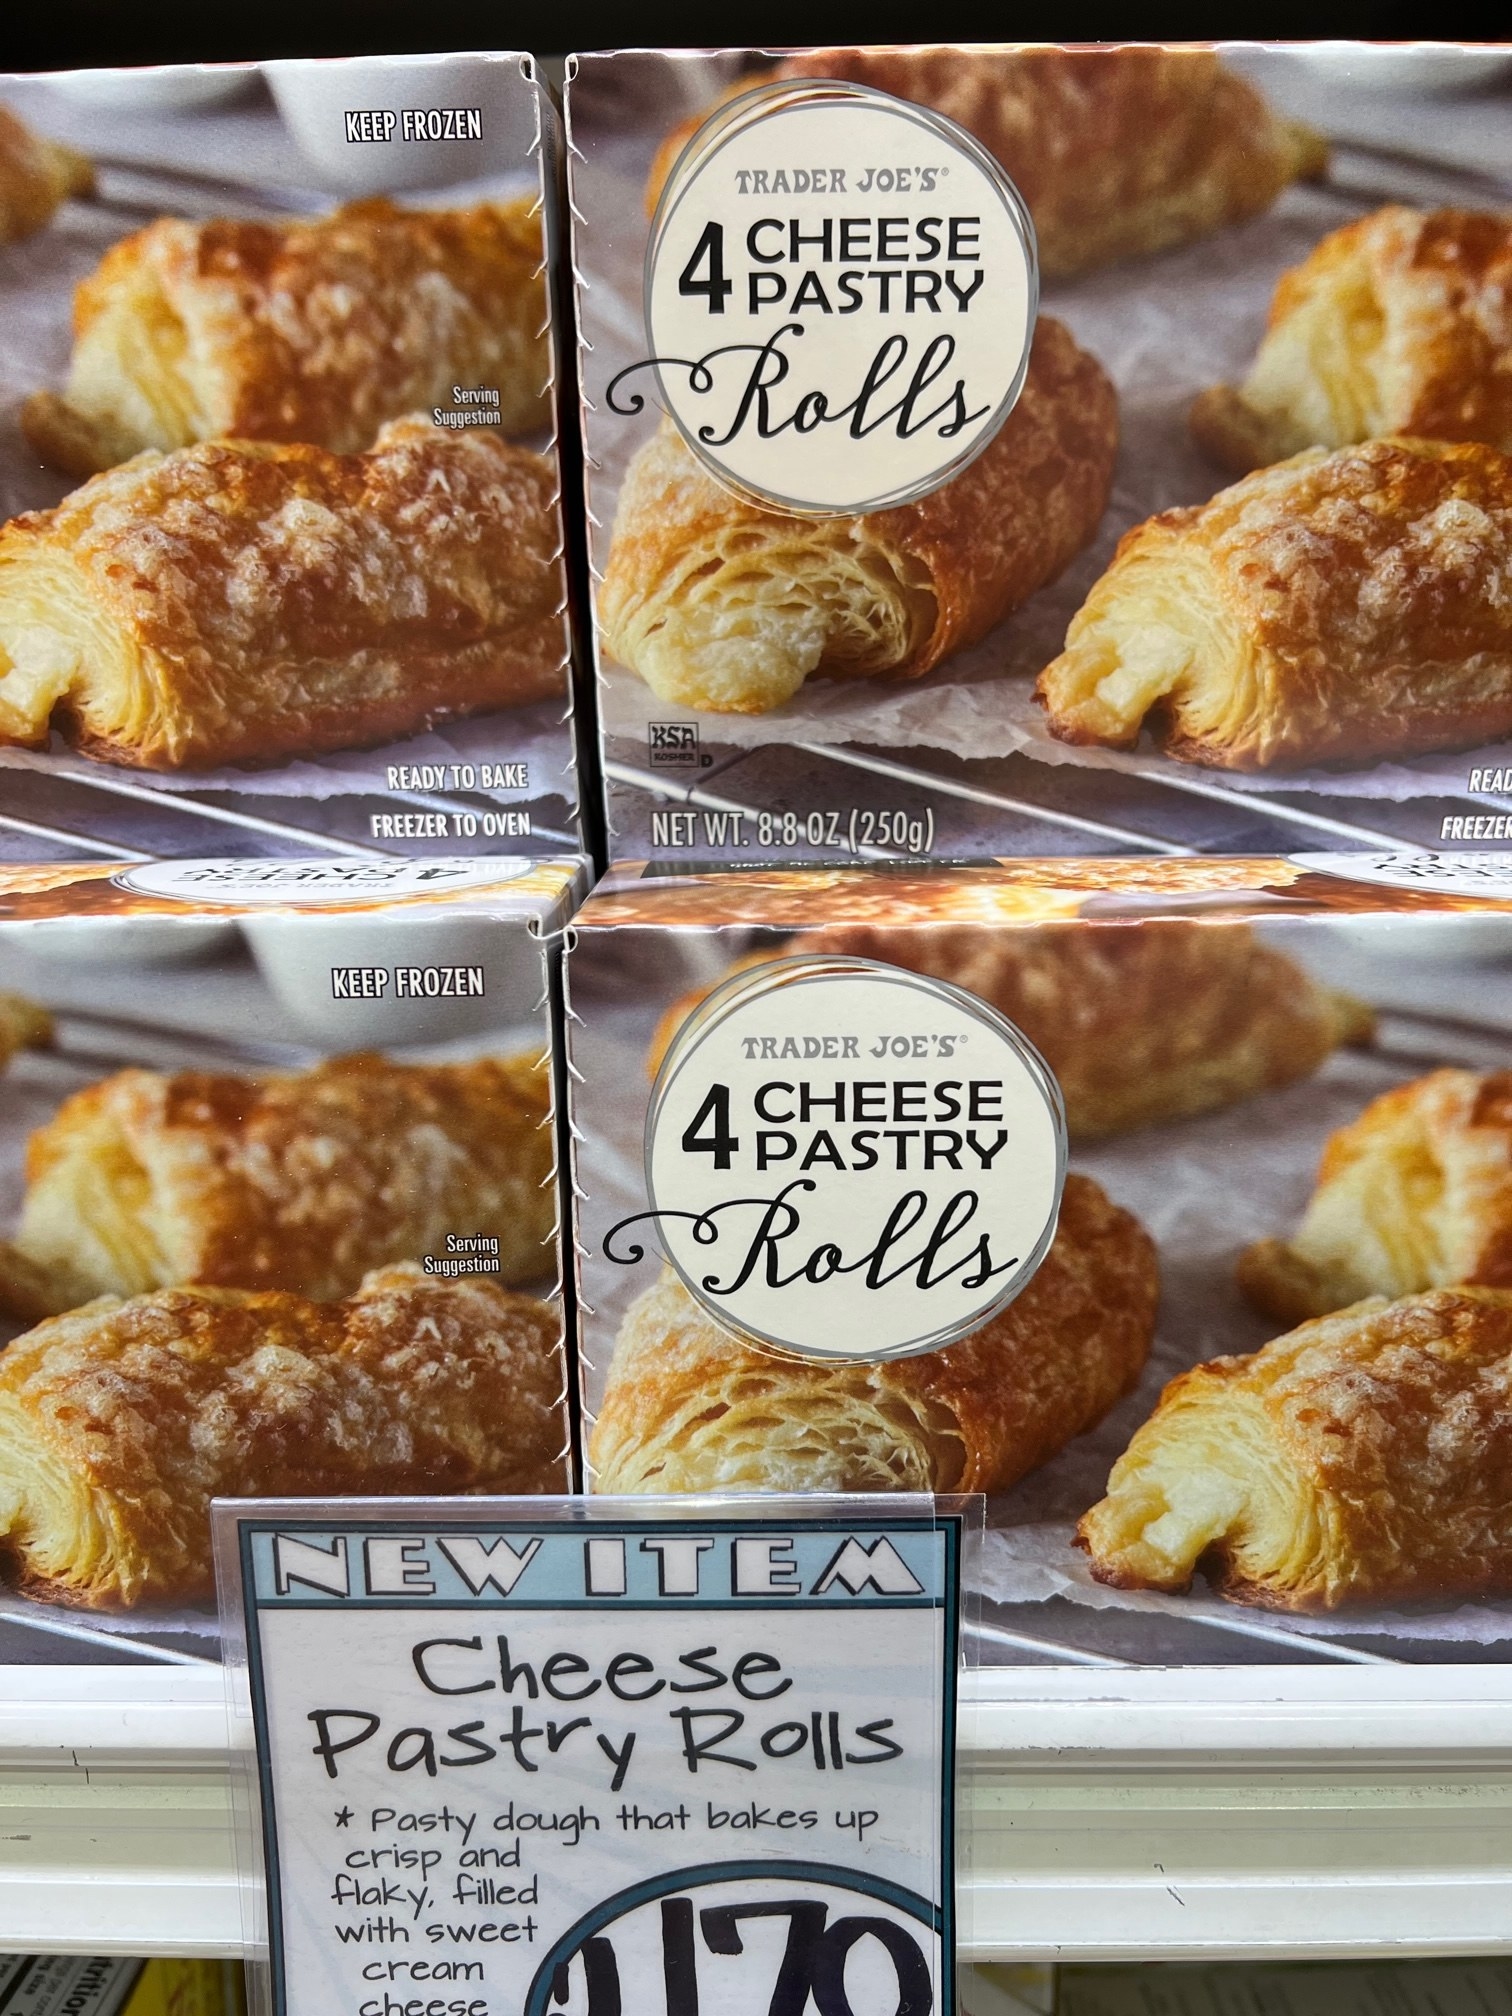 Boxes of 4 Cheese Pastry Rolls